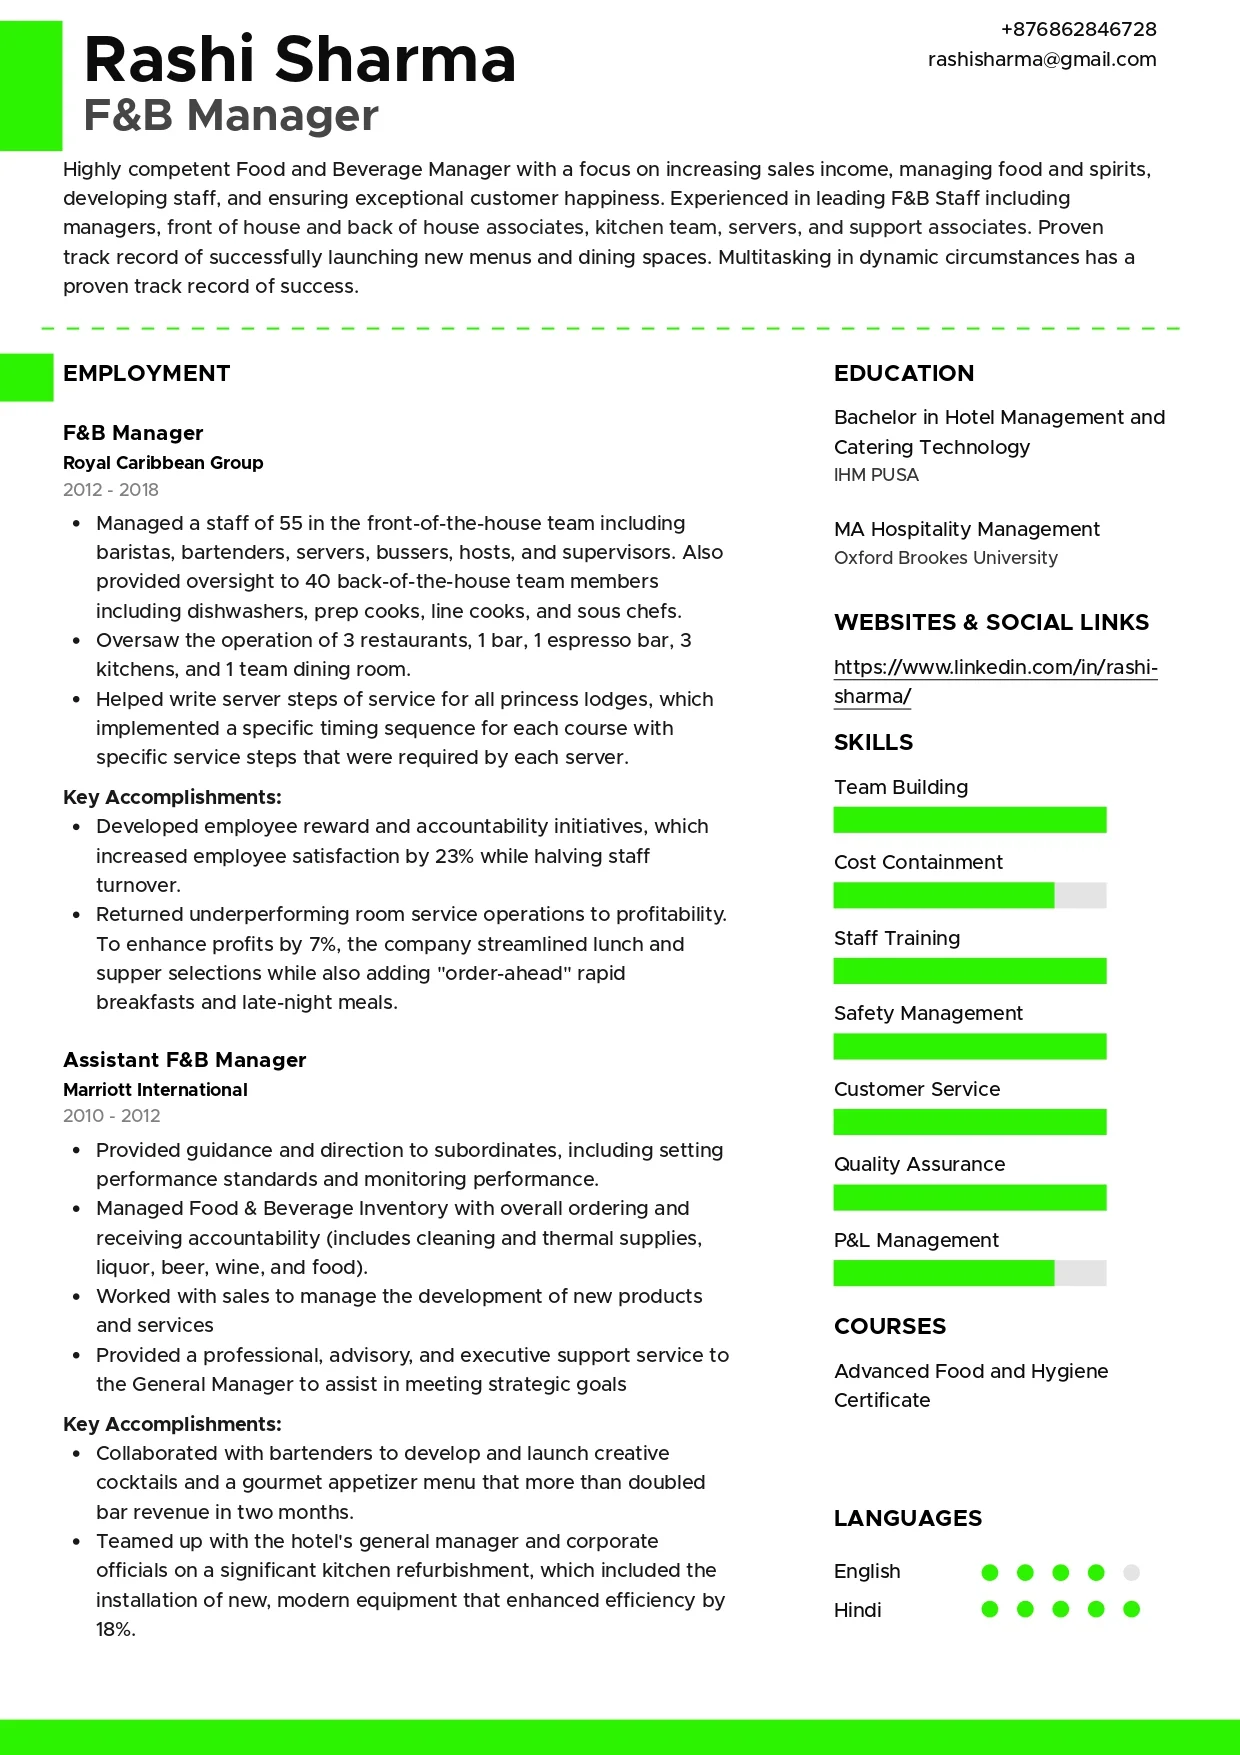 Sample Resume of F&B Manager | Free Resume Templates & Samples on Resumod.co